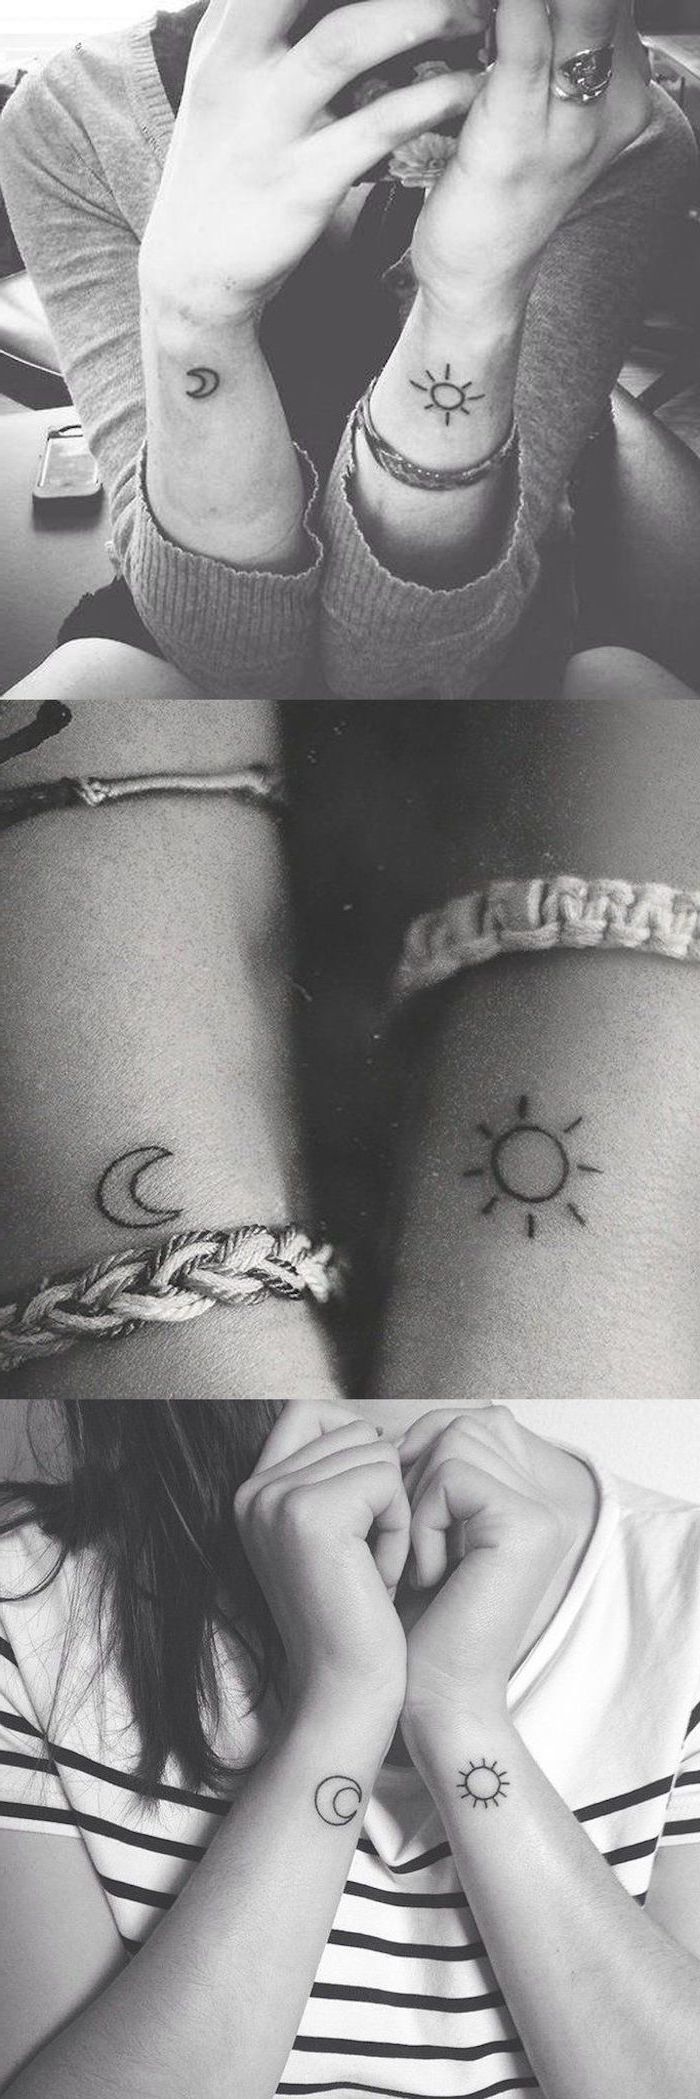 sun and moon tattoos on the wrists, arm tattoos for girls, bracelets on the wrists